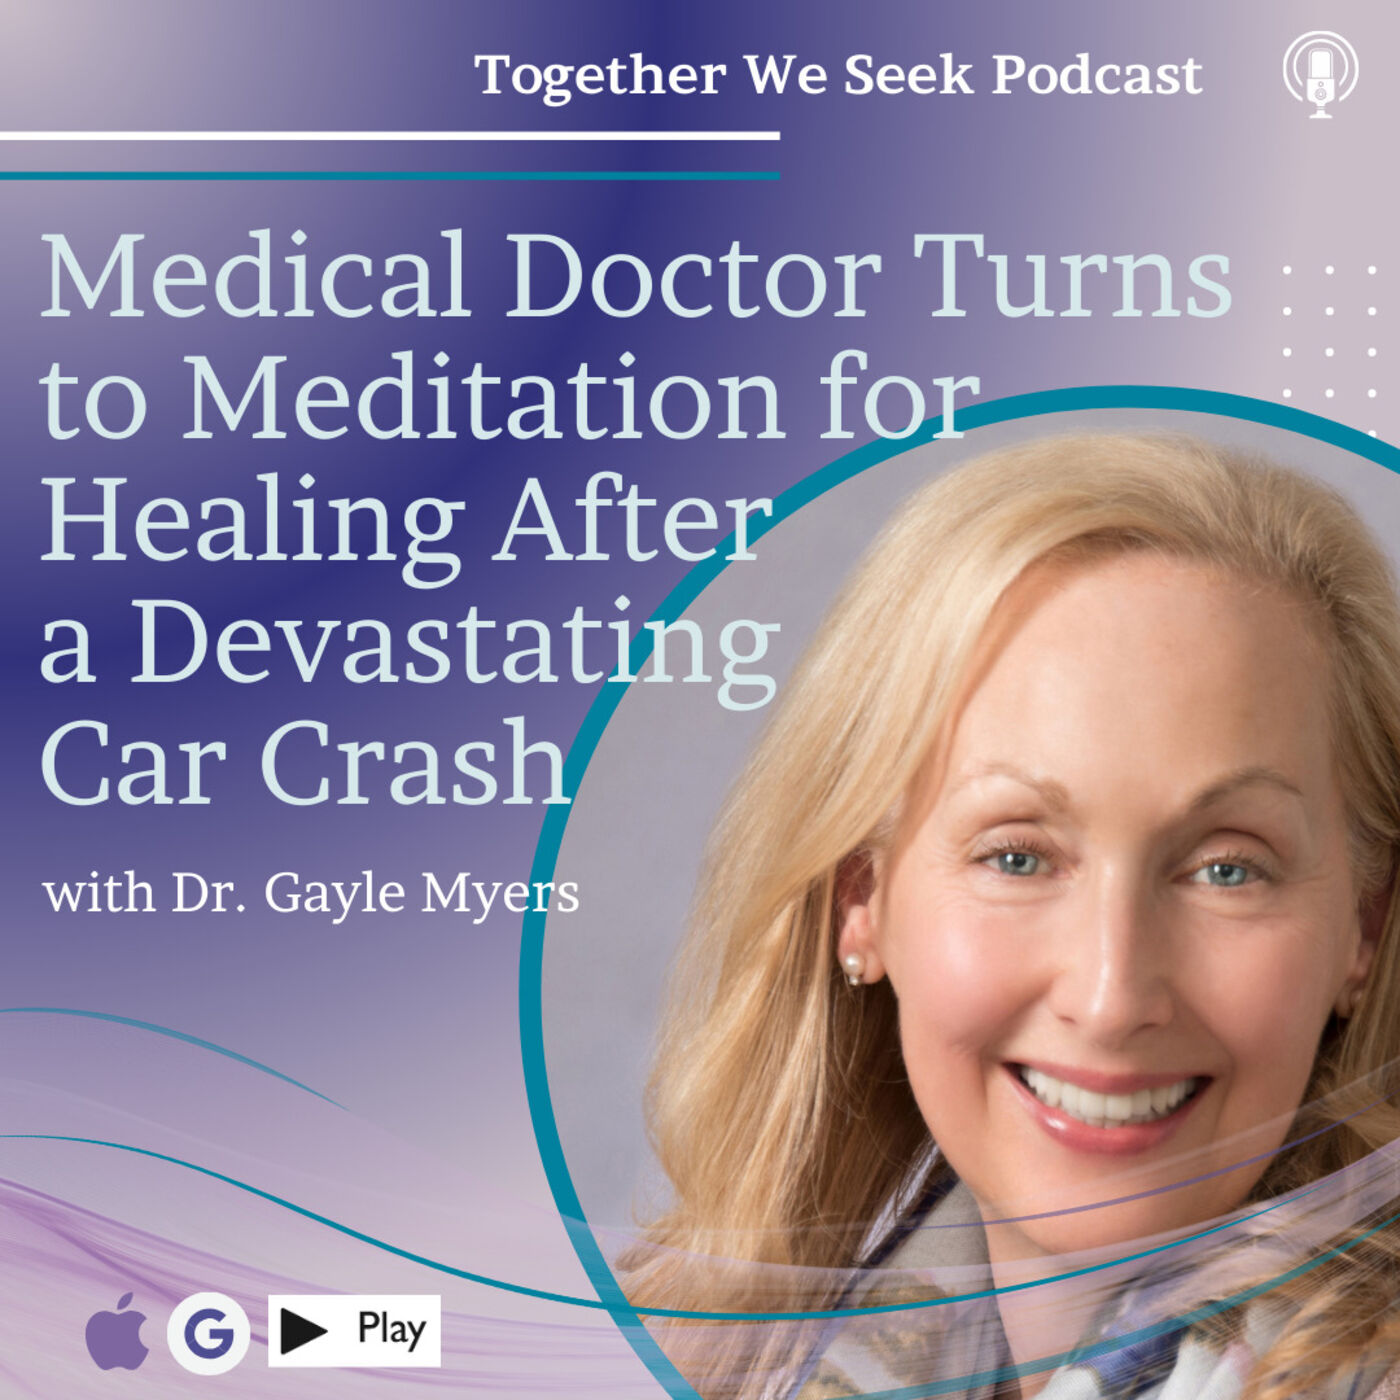 Medical Doctor Turns to Meditation for Healing & Recovery After a Devastating Crash with Dr. Gayle Myers